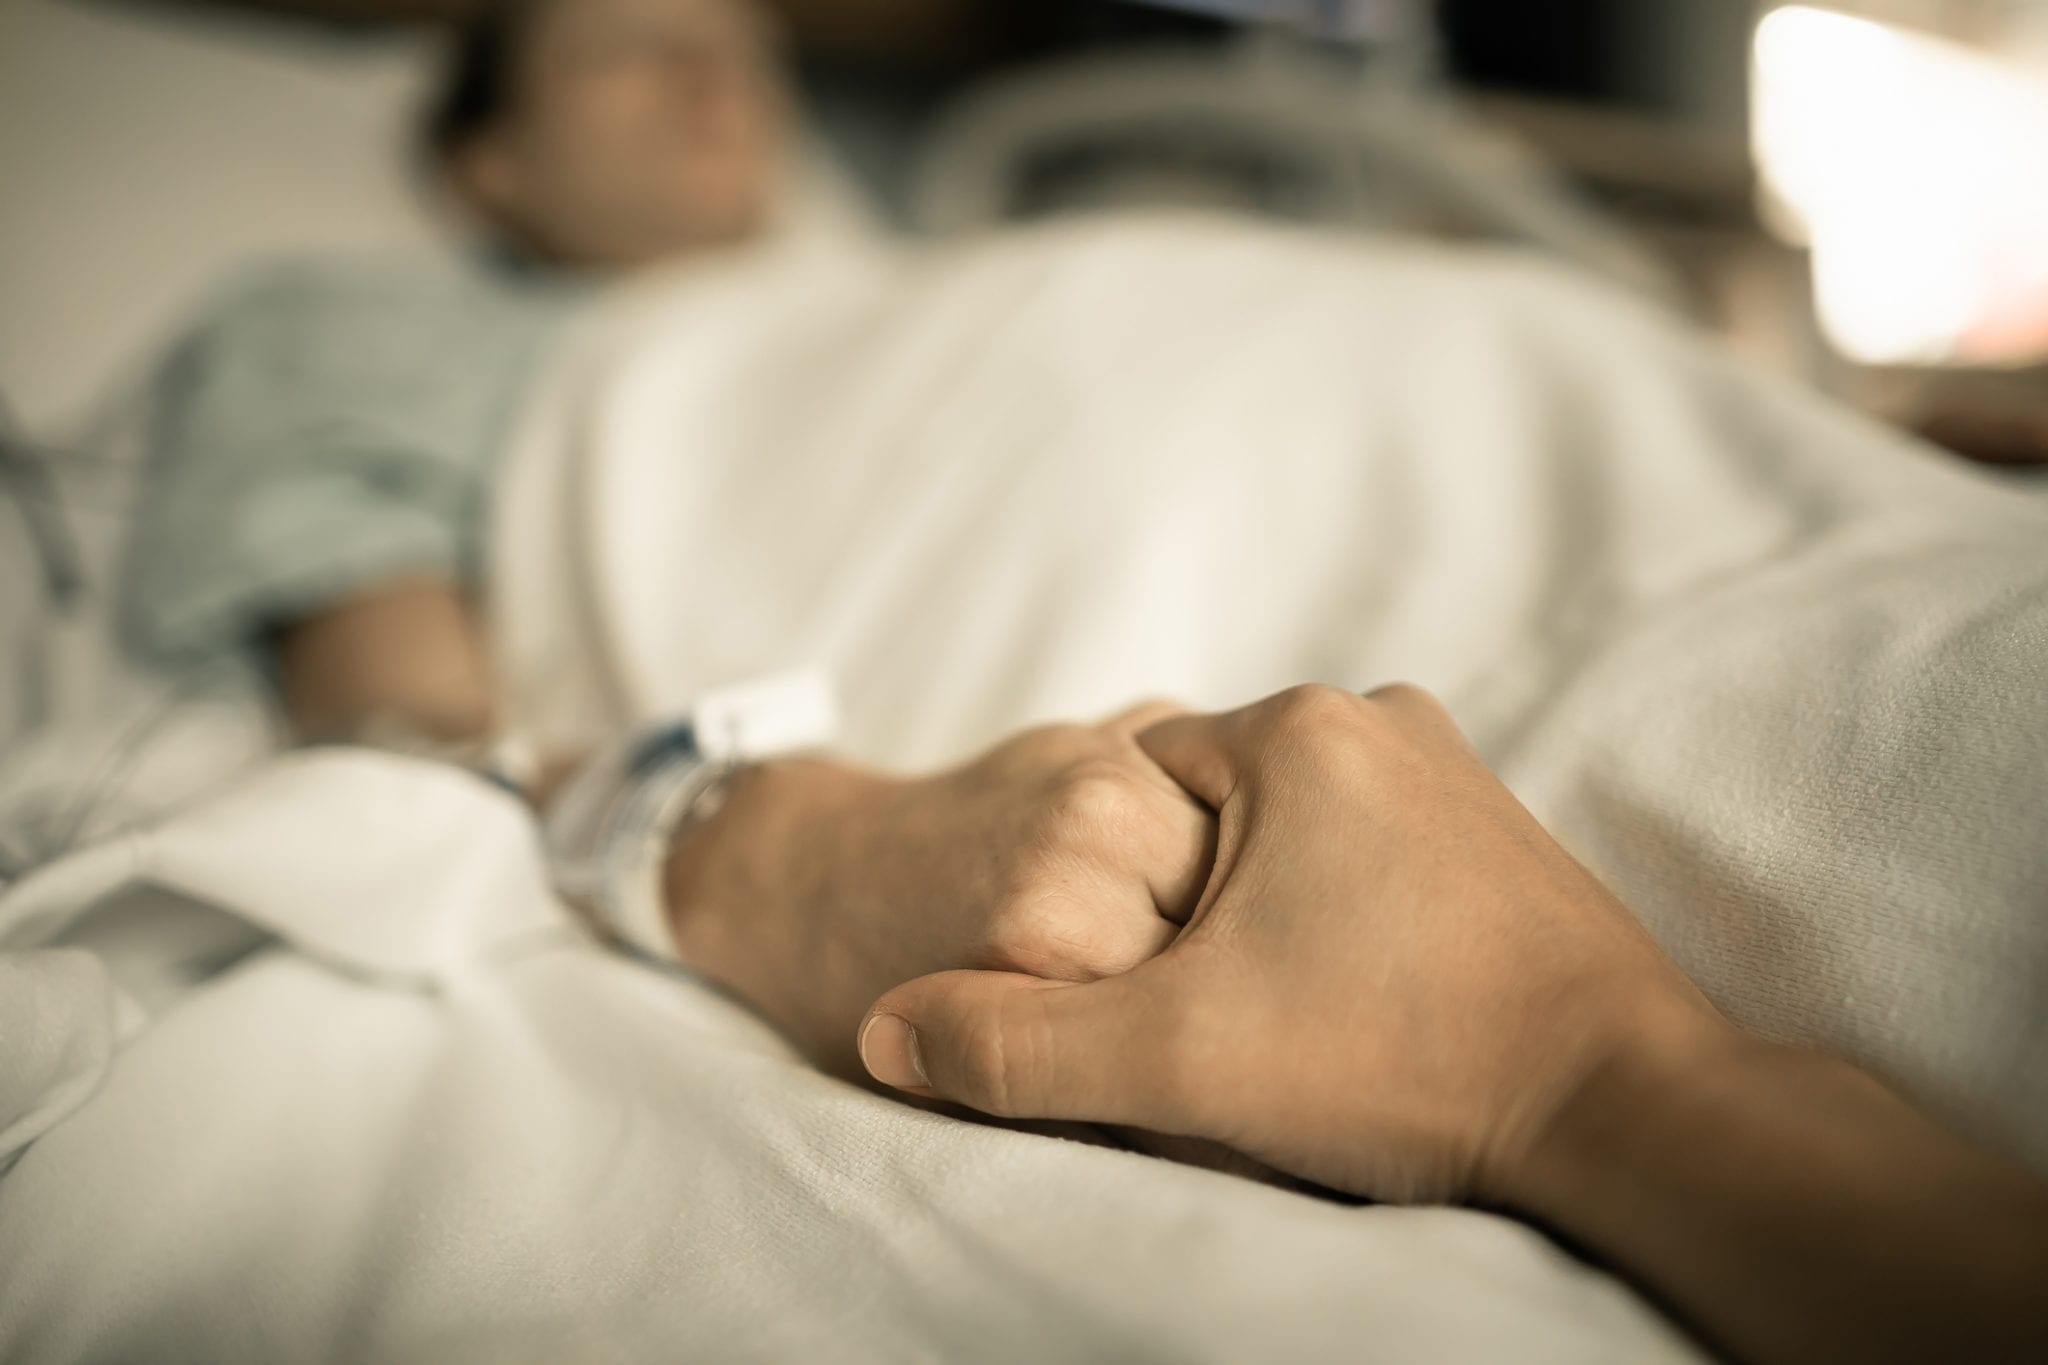 Man holding woman hand in hospital bed. Holding hands in hospital bed.